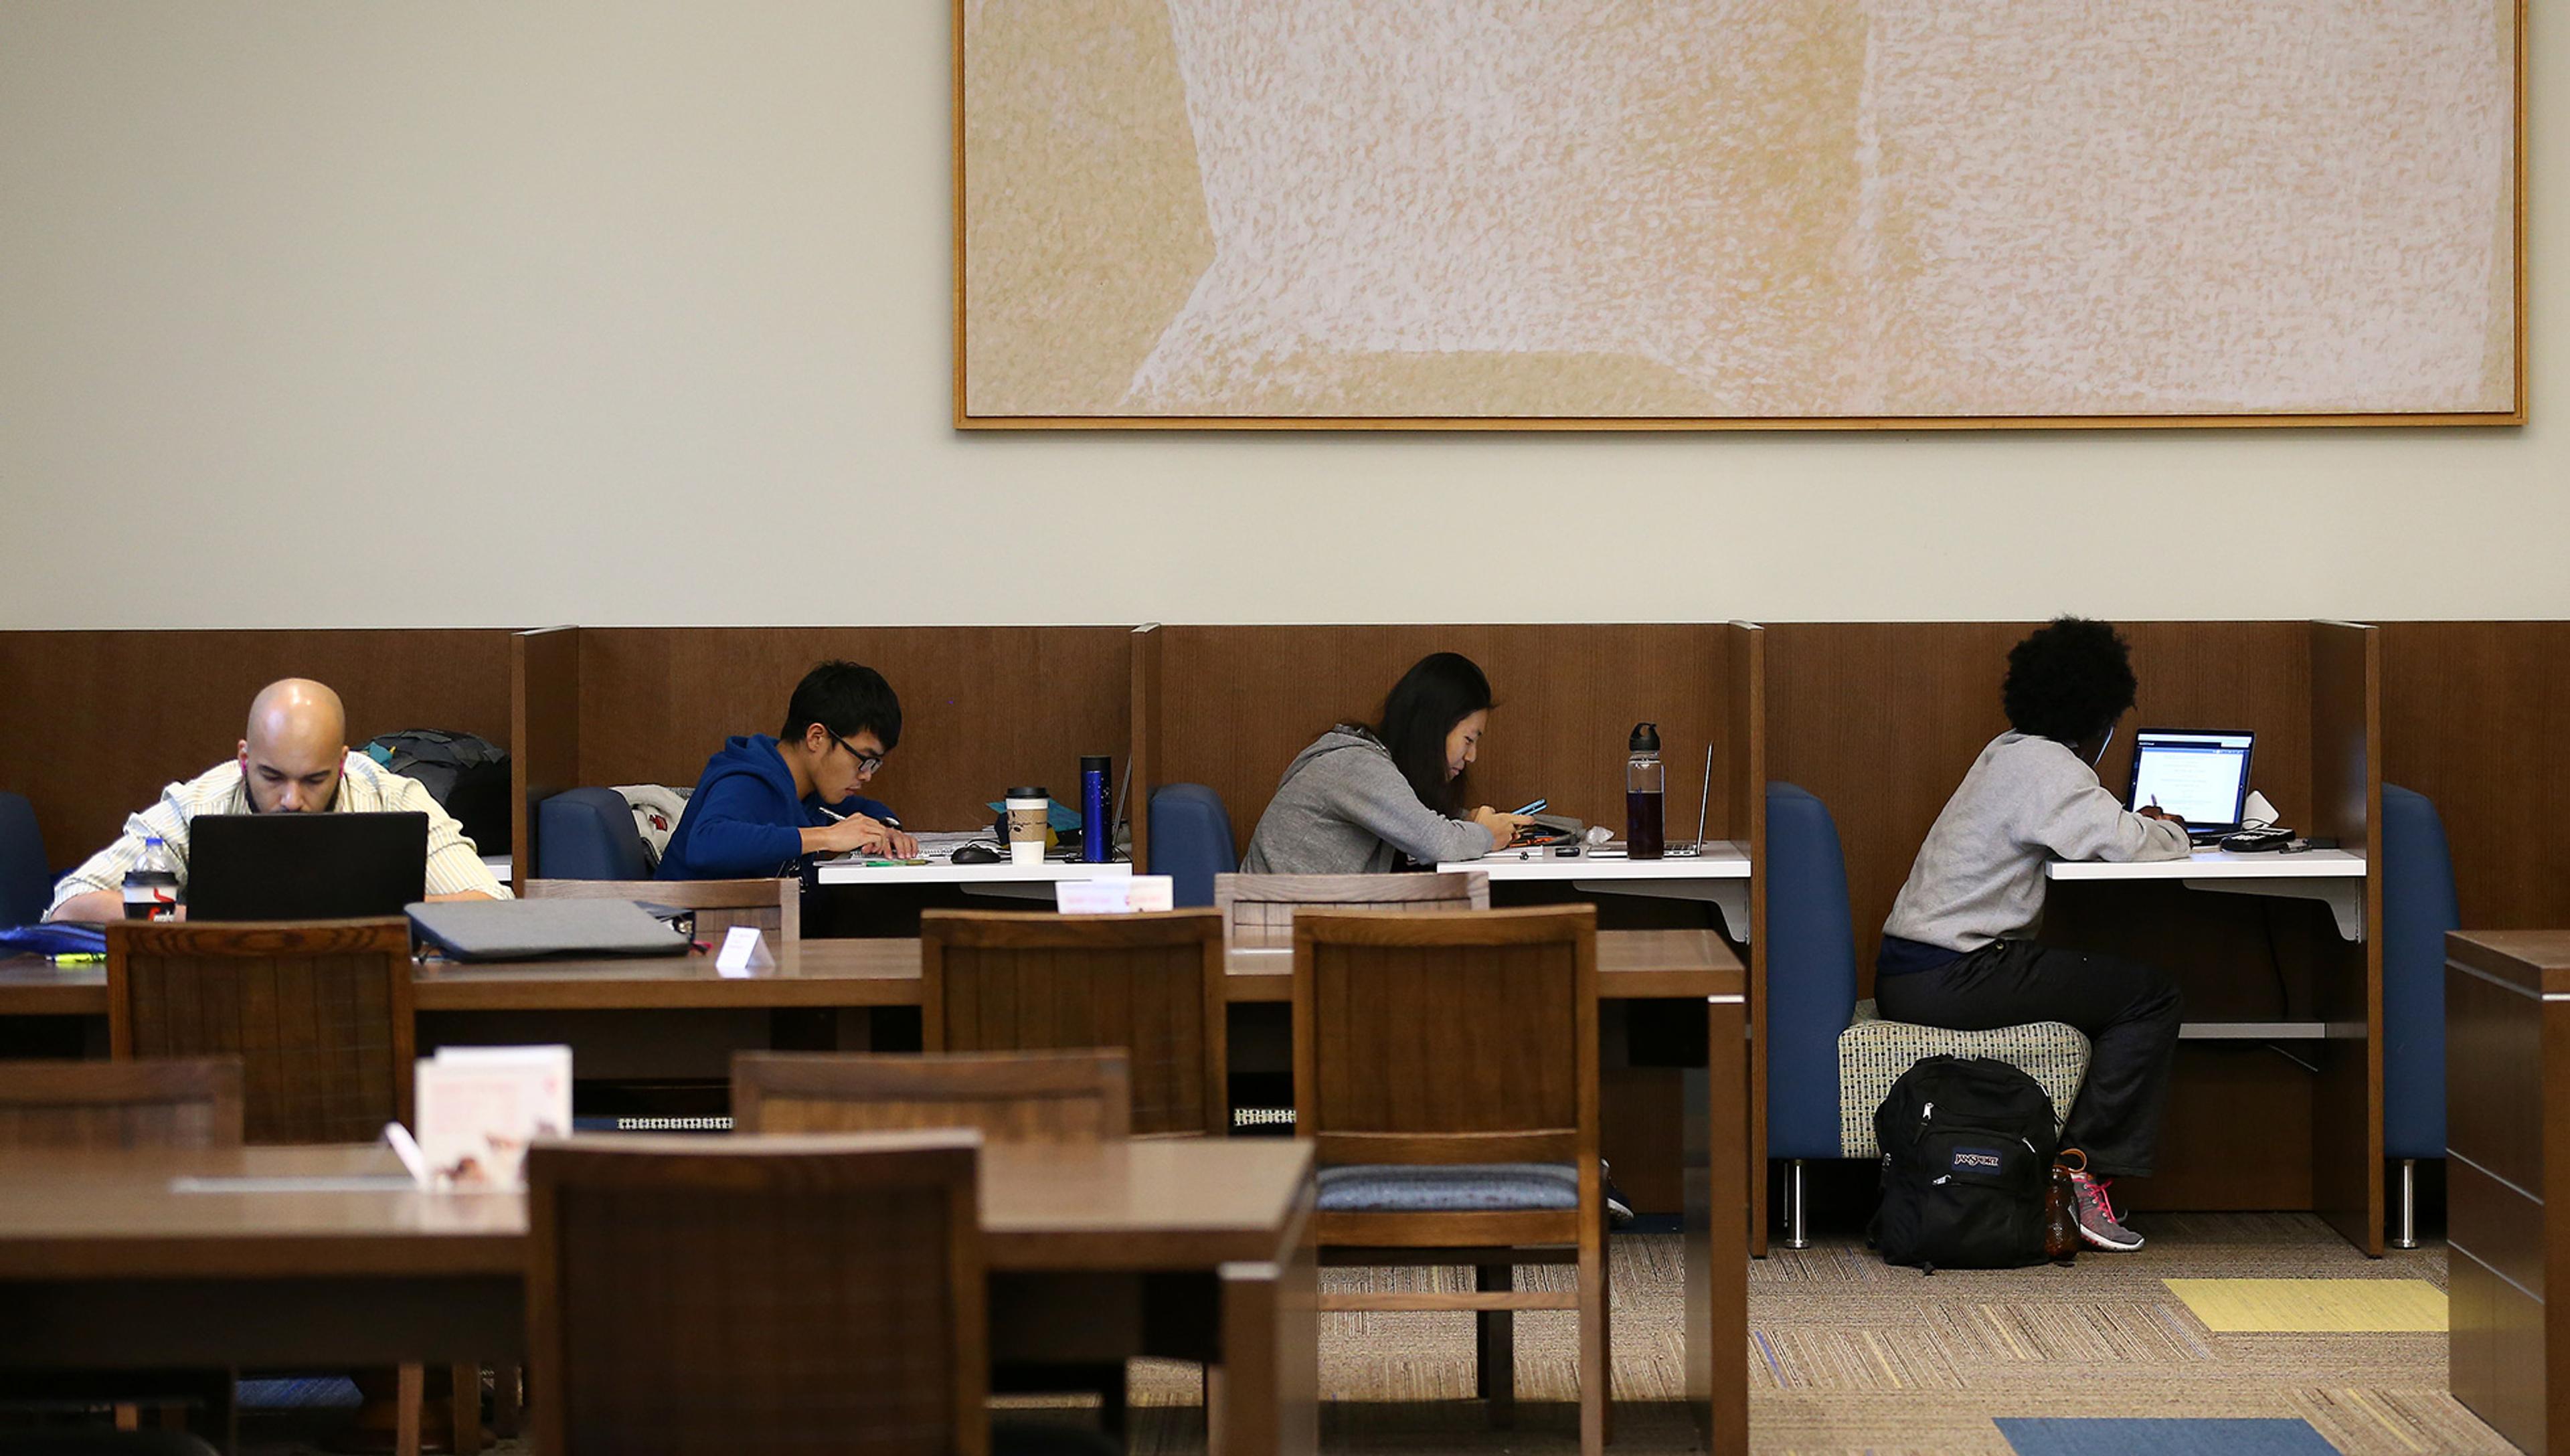 Students in a library, studying at their own private desk in cubicles or at a communal table